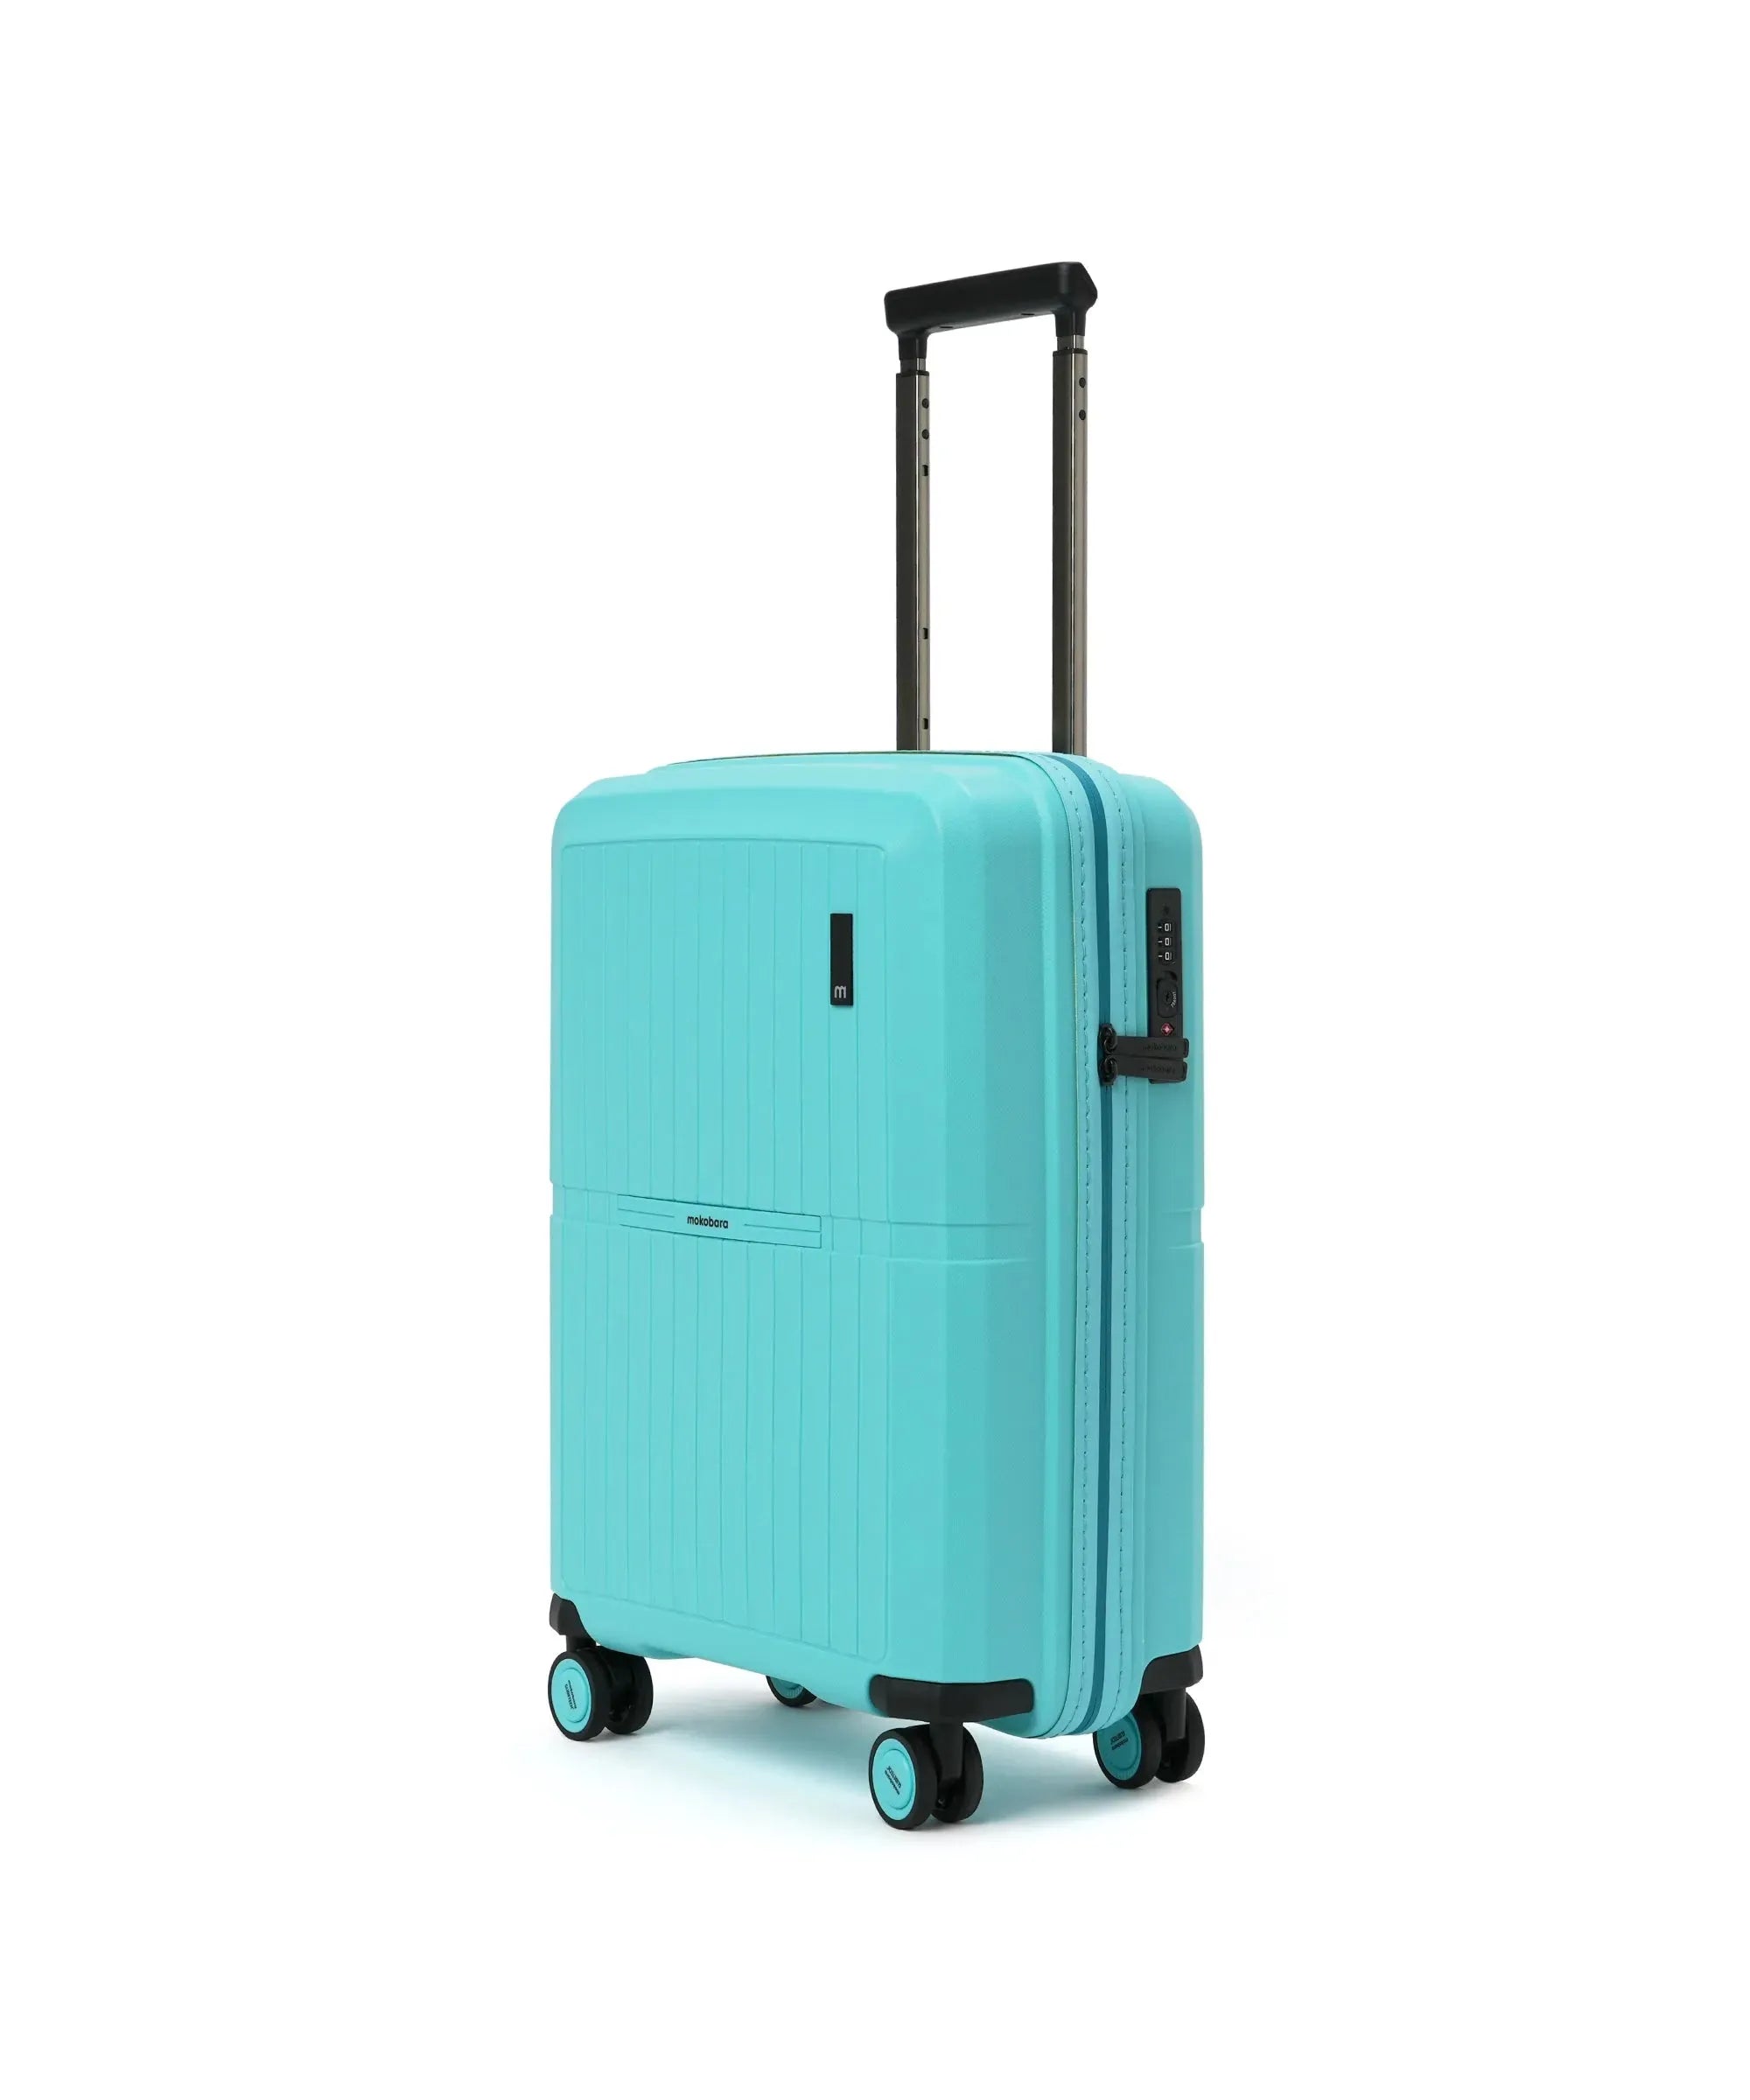 Color_Out of the Blue | The Aviator Luggage